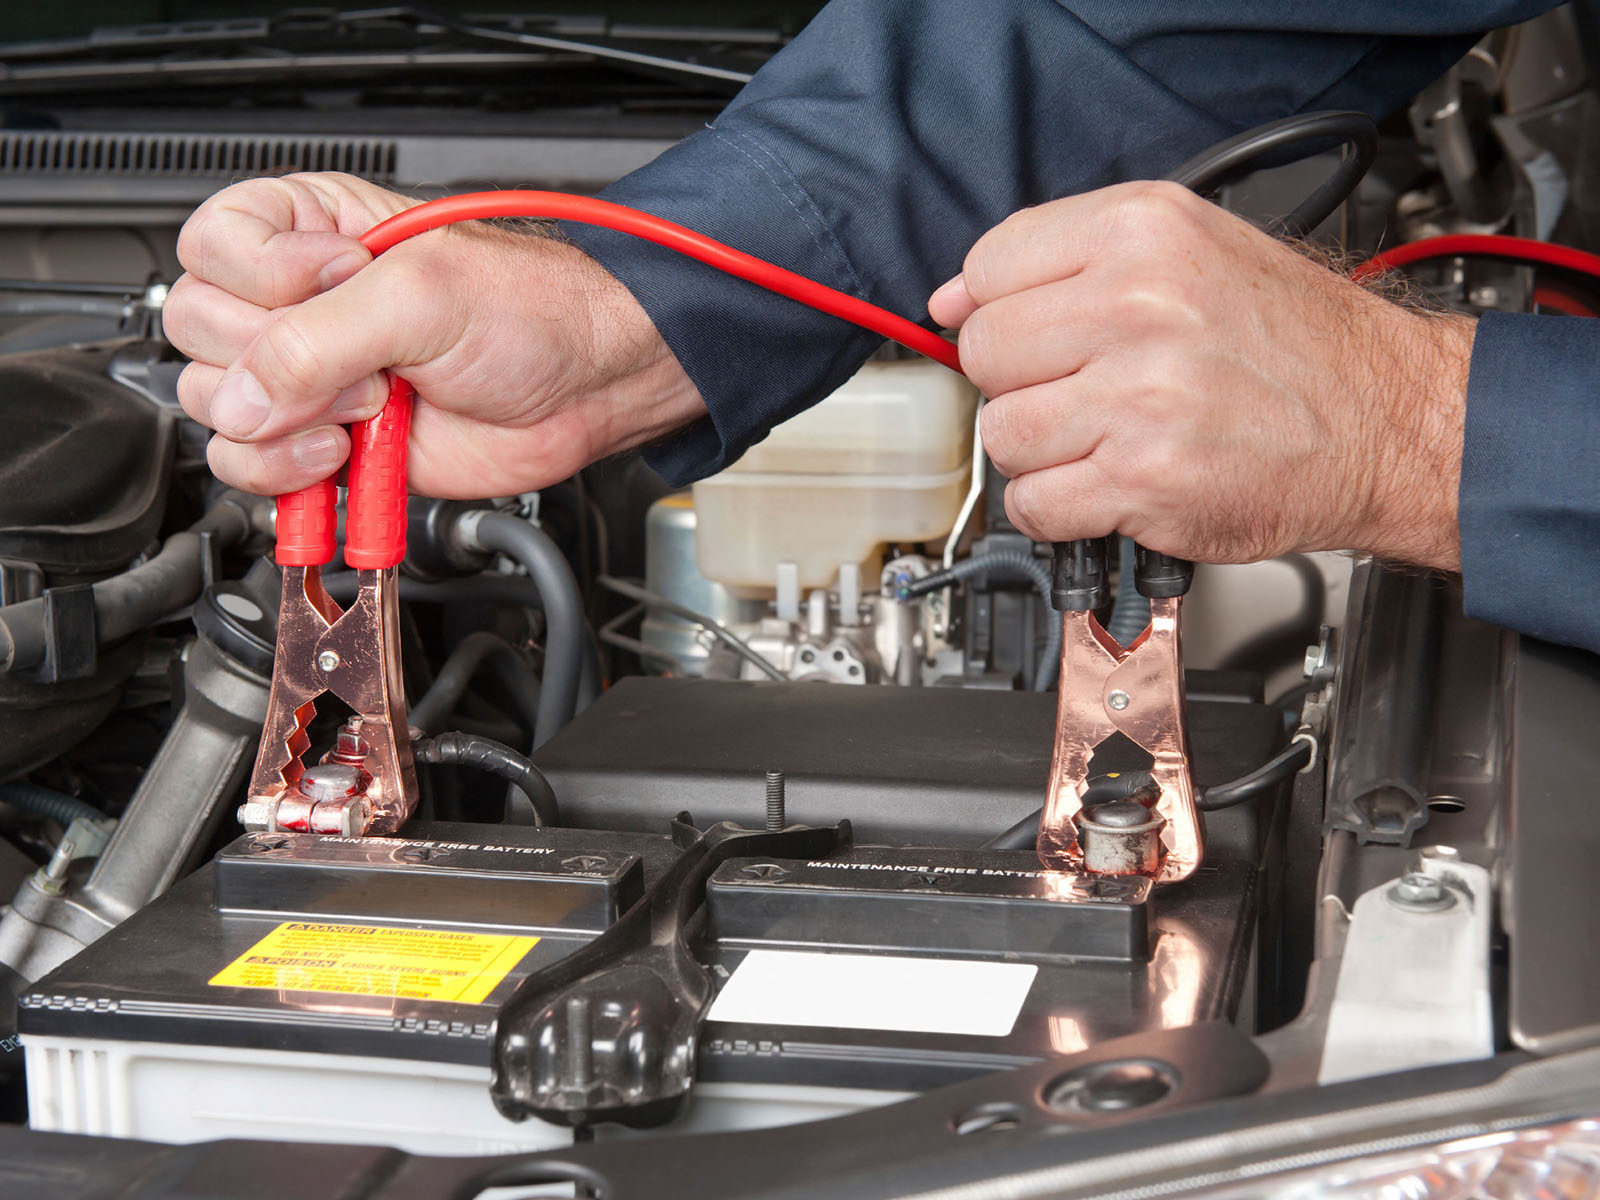 Ford service technician connecting a car battery